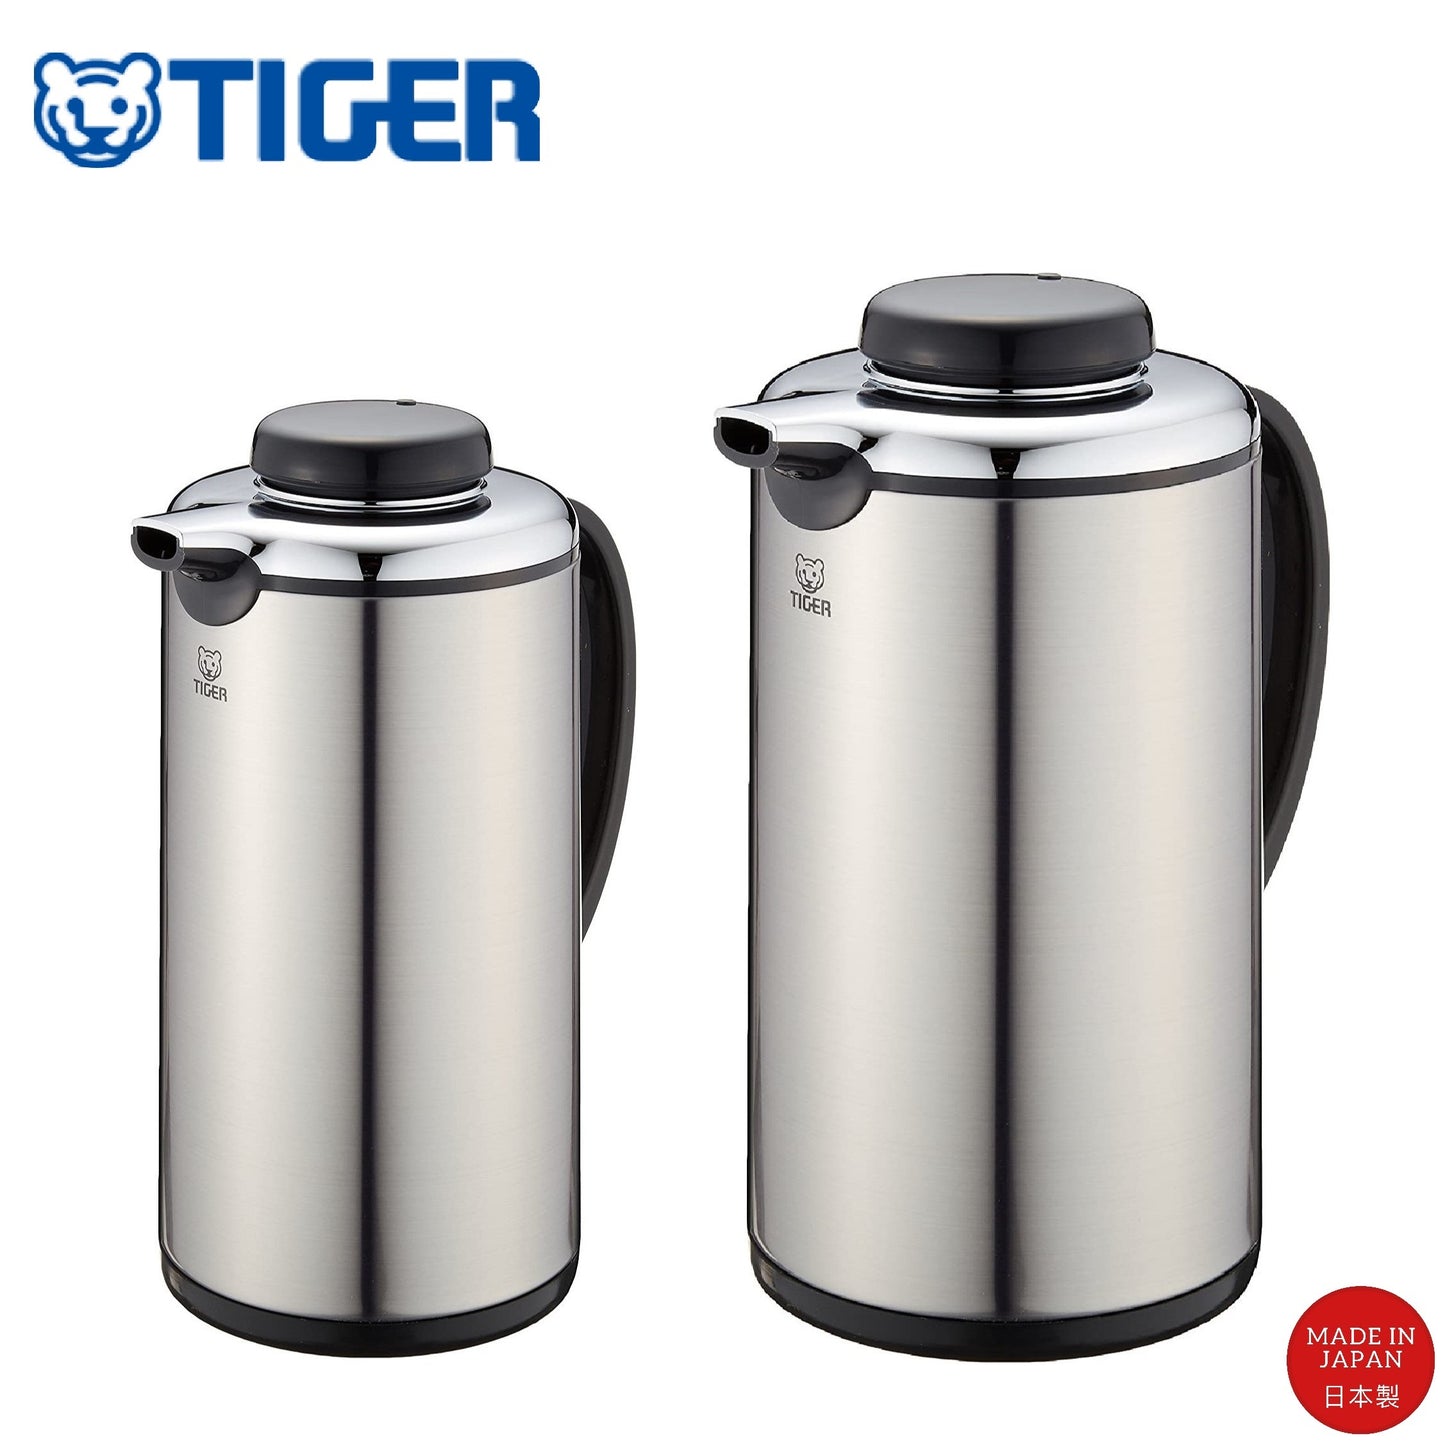 Tiger Vacuum Insulated Stainless Steel Bottle 1.2/1.6L/2.0L